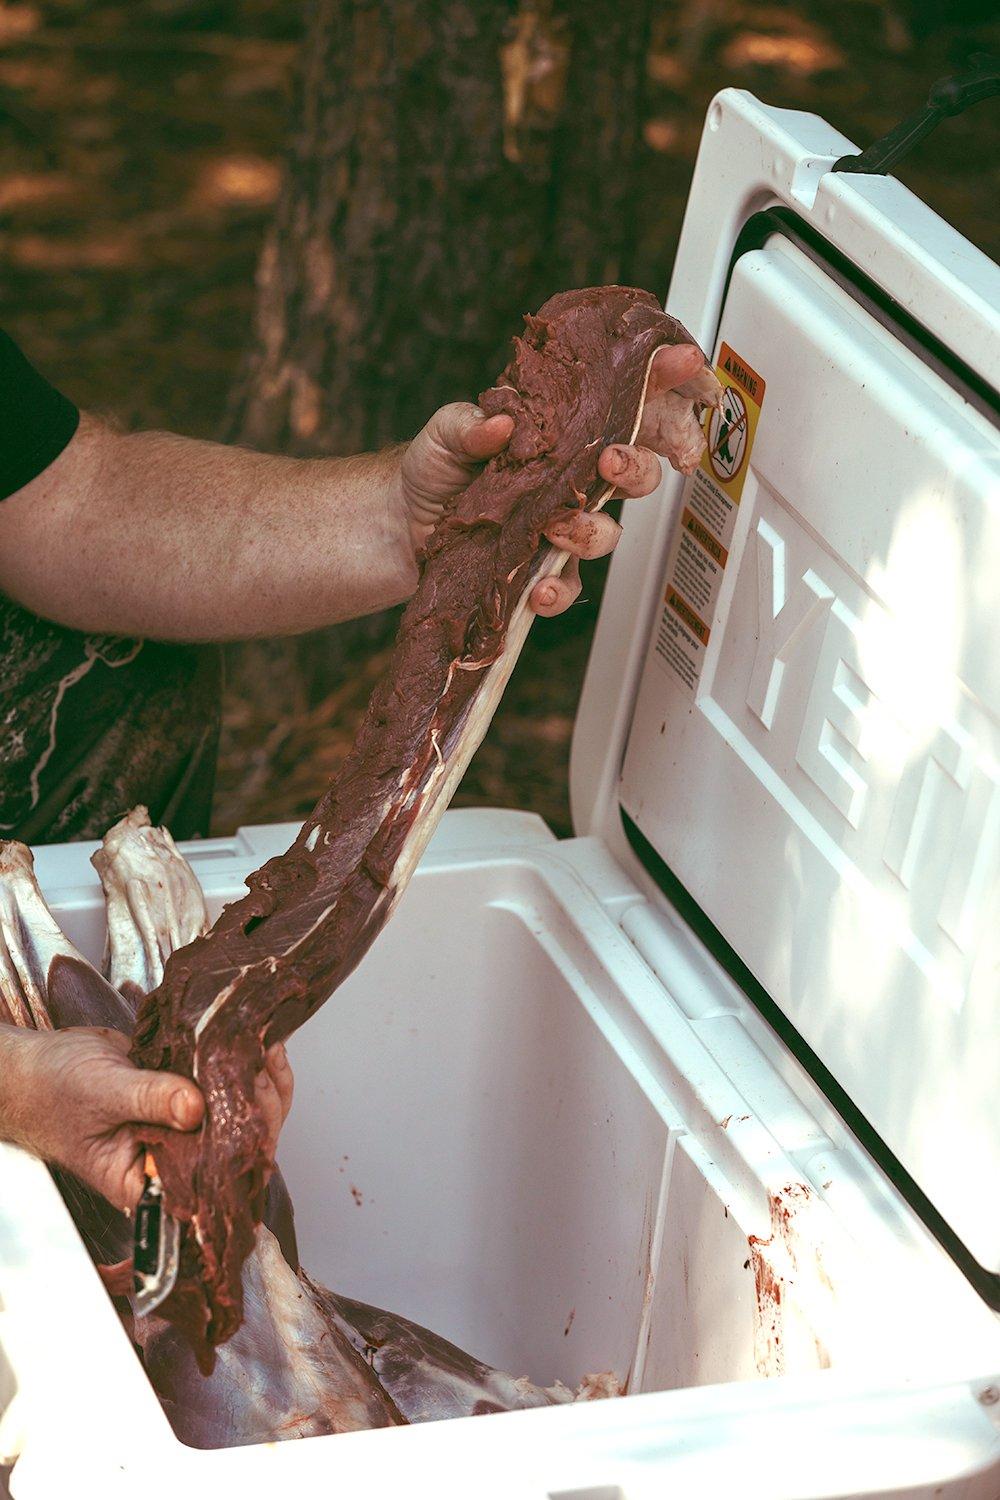 When you can't get to a walk in cooler in a hurry, you need to get your venison into a cooler with ice. Image by Kerry Wix